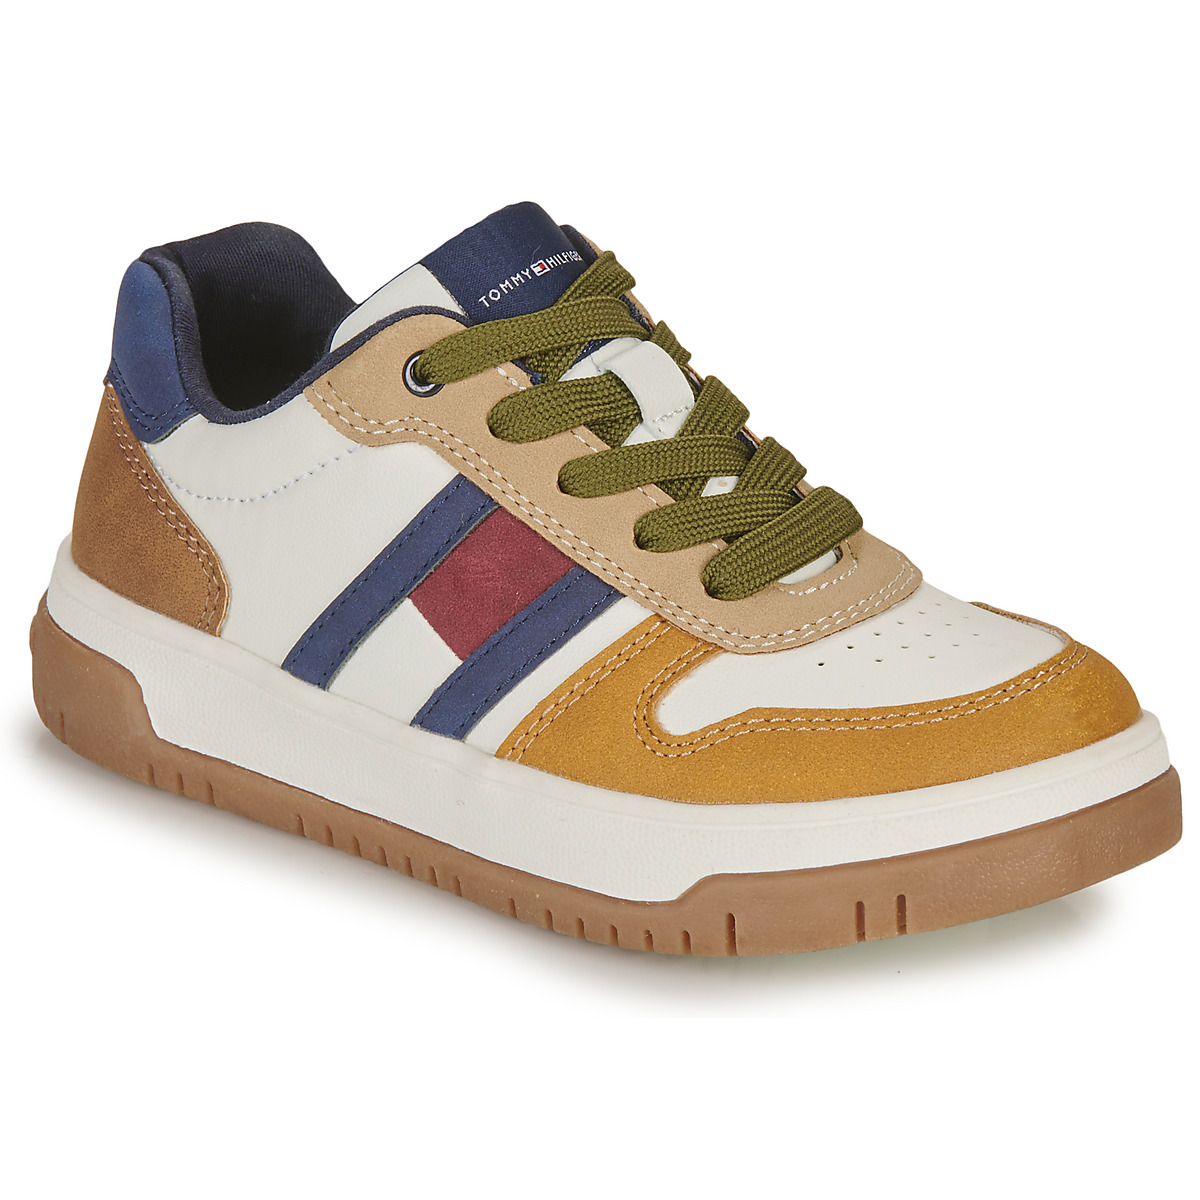 Tommy Hilfiger Multicolore T3X9-33118-1269A330 hLLiz67y